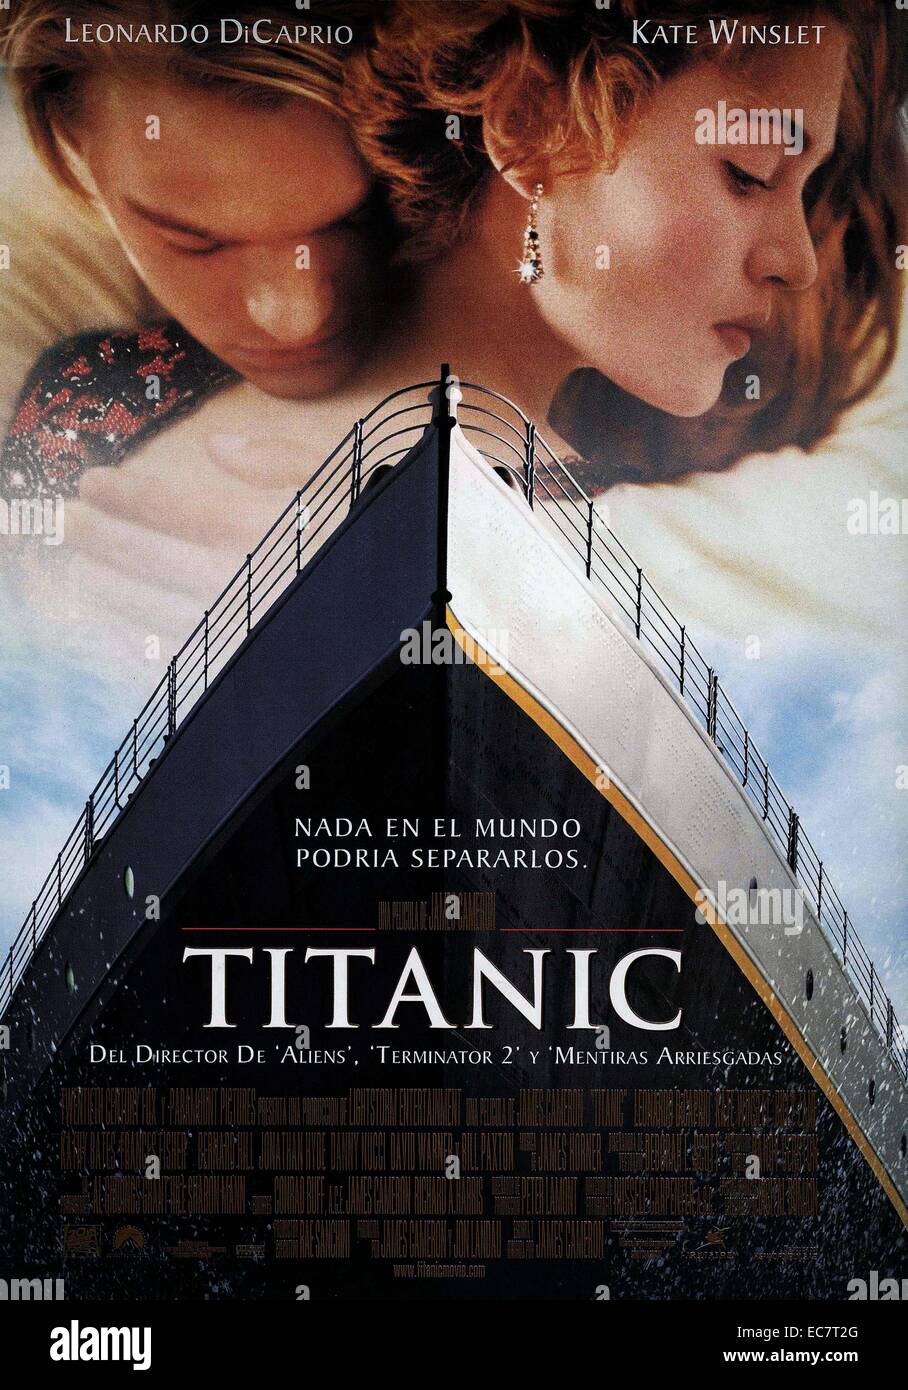 Titanic is a 1997 American epic romantic disaster film directed, written, co-produced, co-edited and partly financed by James Cameron. A fictionalized account of the sinking of the RMS Titanic, it stars Leonardo DiCaprio and Kate Winslet as members of different social classes who fall in love aboard the ship during its ill-fated maiden voyage. Stock Photo